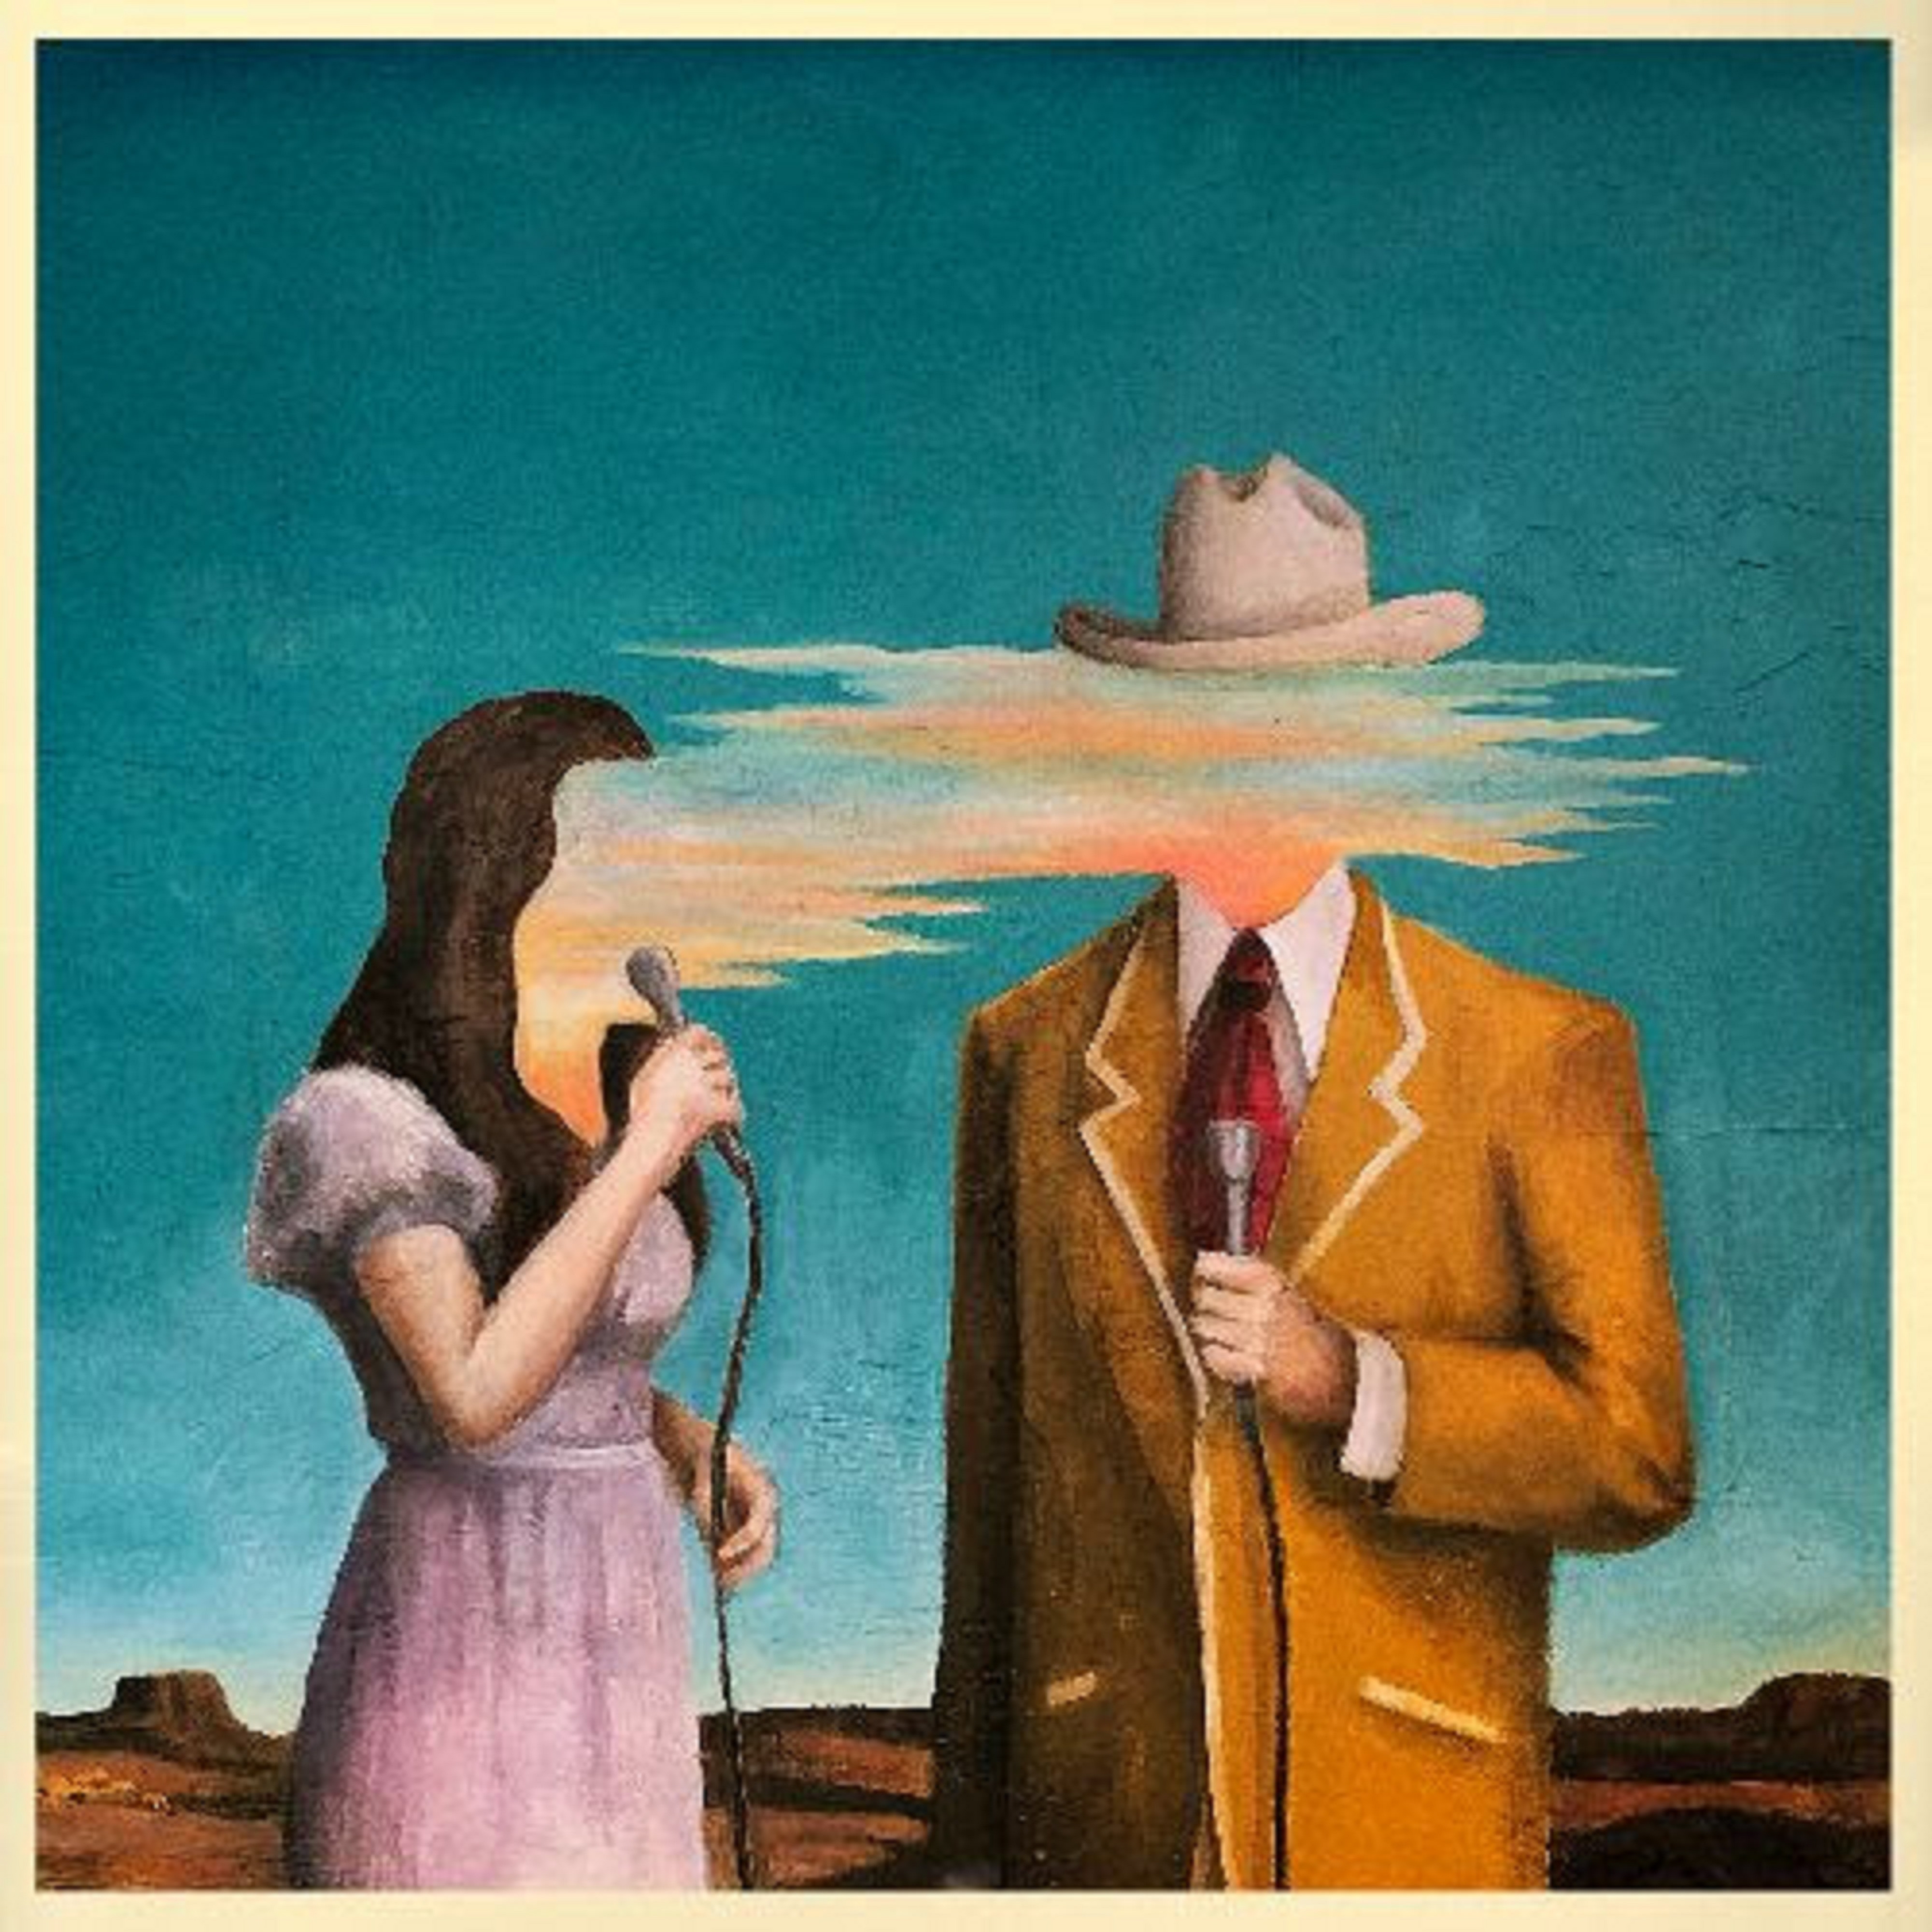 LORD HURON TEAM UP WITH ALLISON PONTHIER FOR NEW TRACK “I LIED”